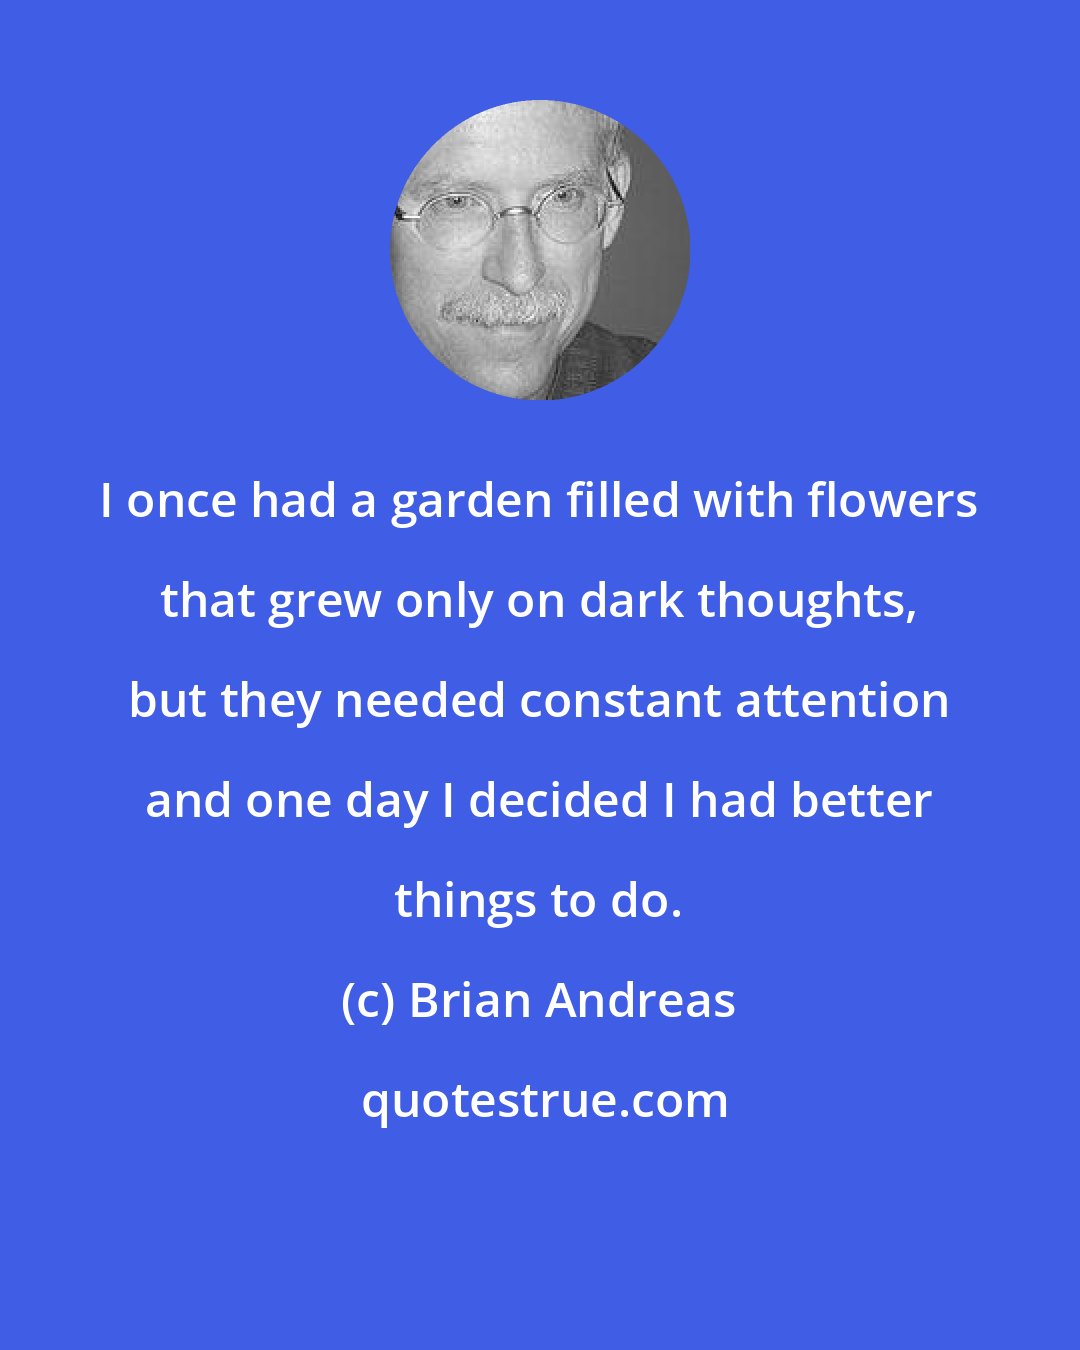 Brian Andreas: I once had a garden filled with flowers that grew only on dark thoughts, but they needed constant attention and one day I decided I had better things to do.